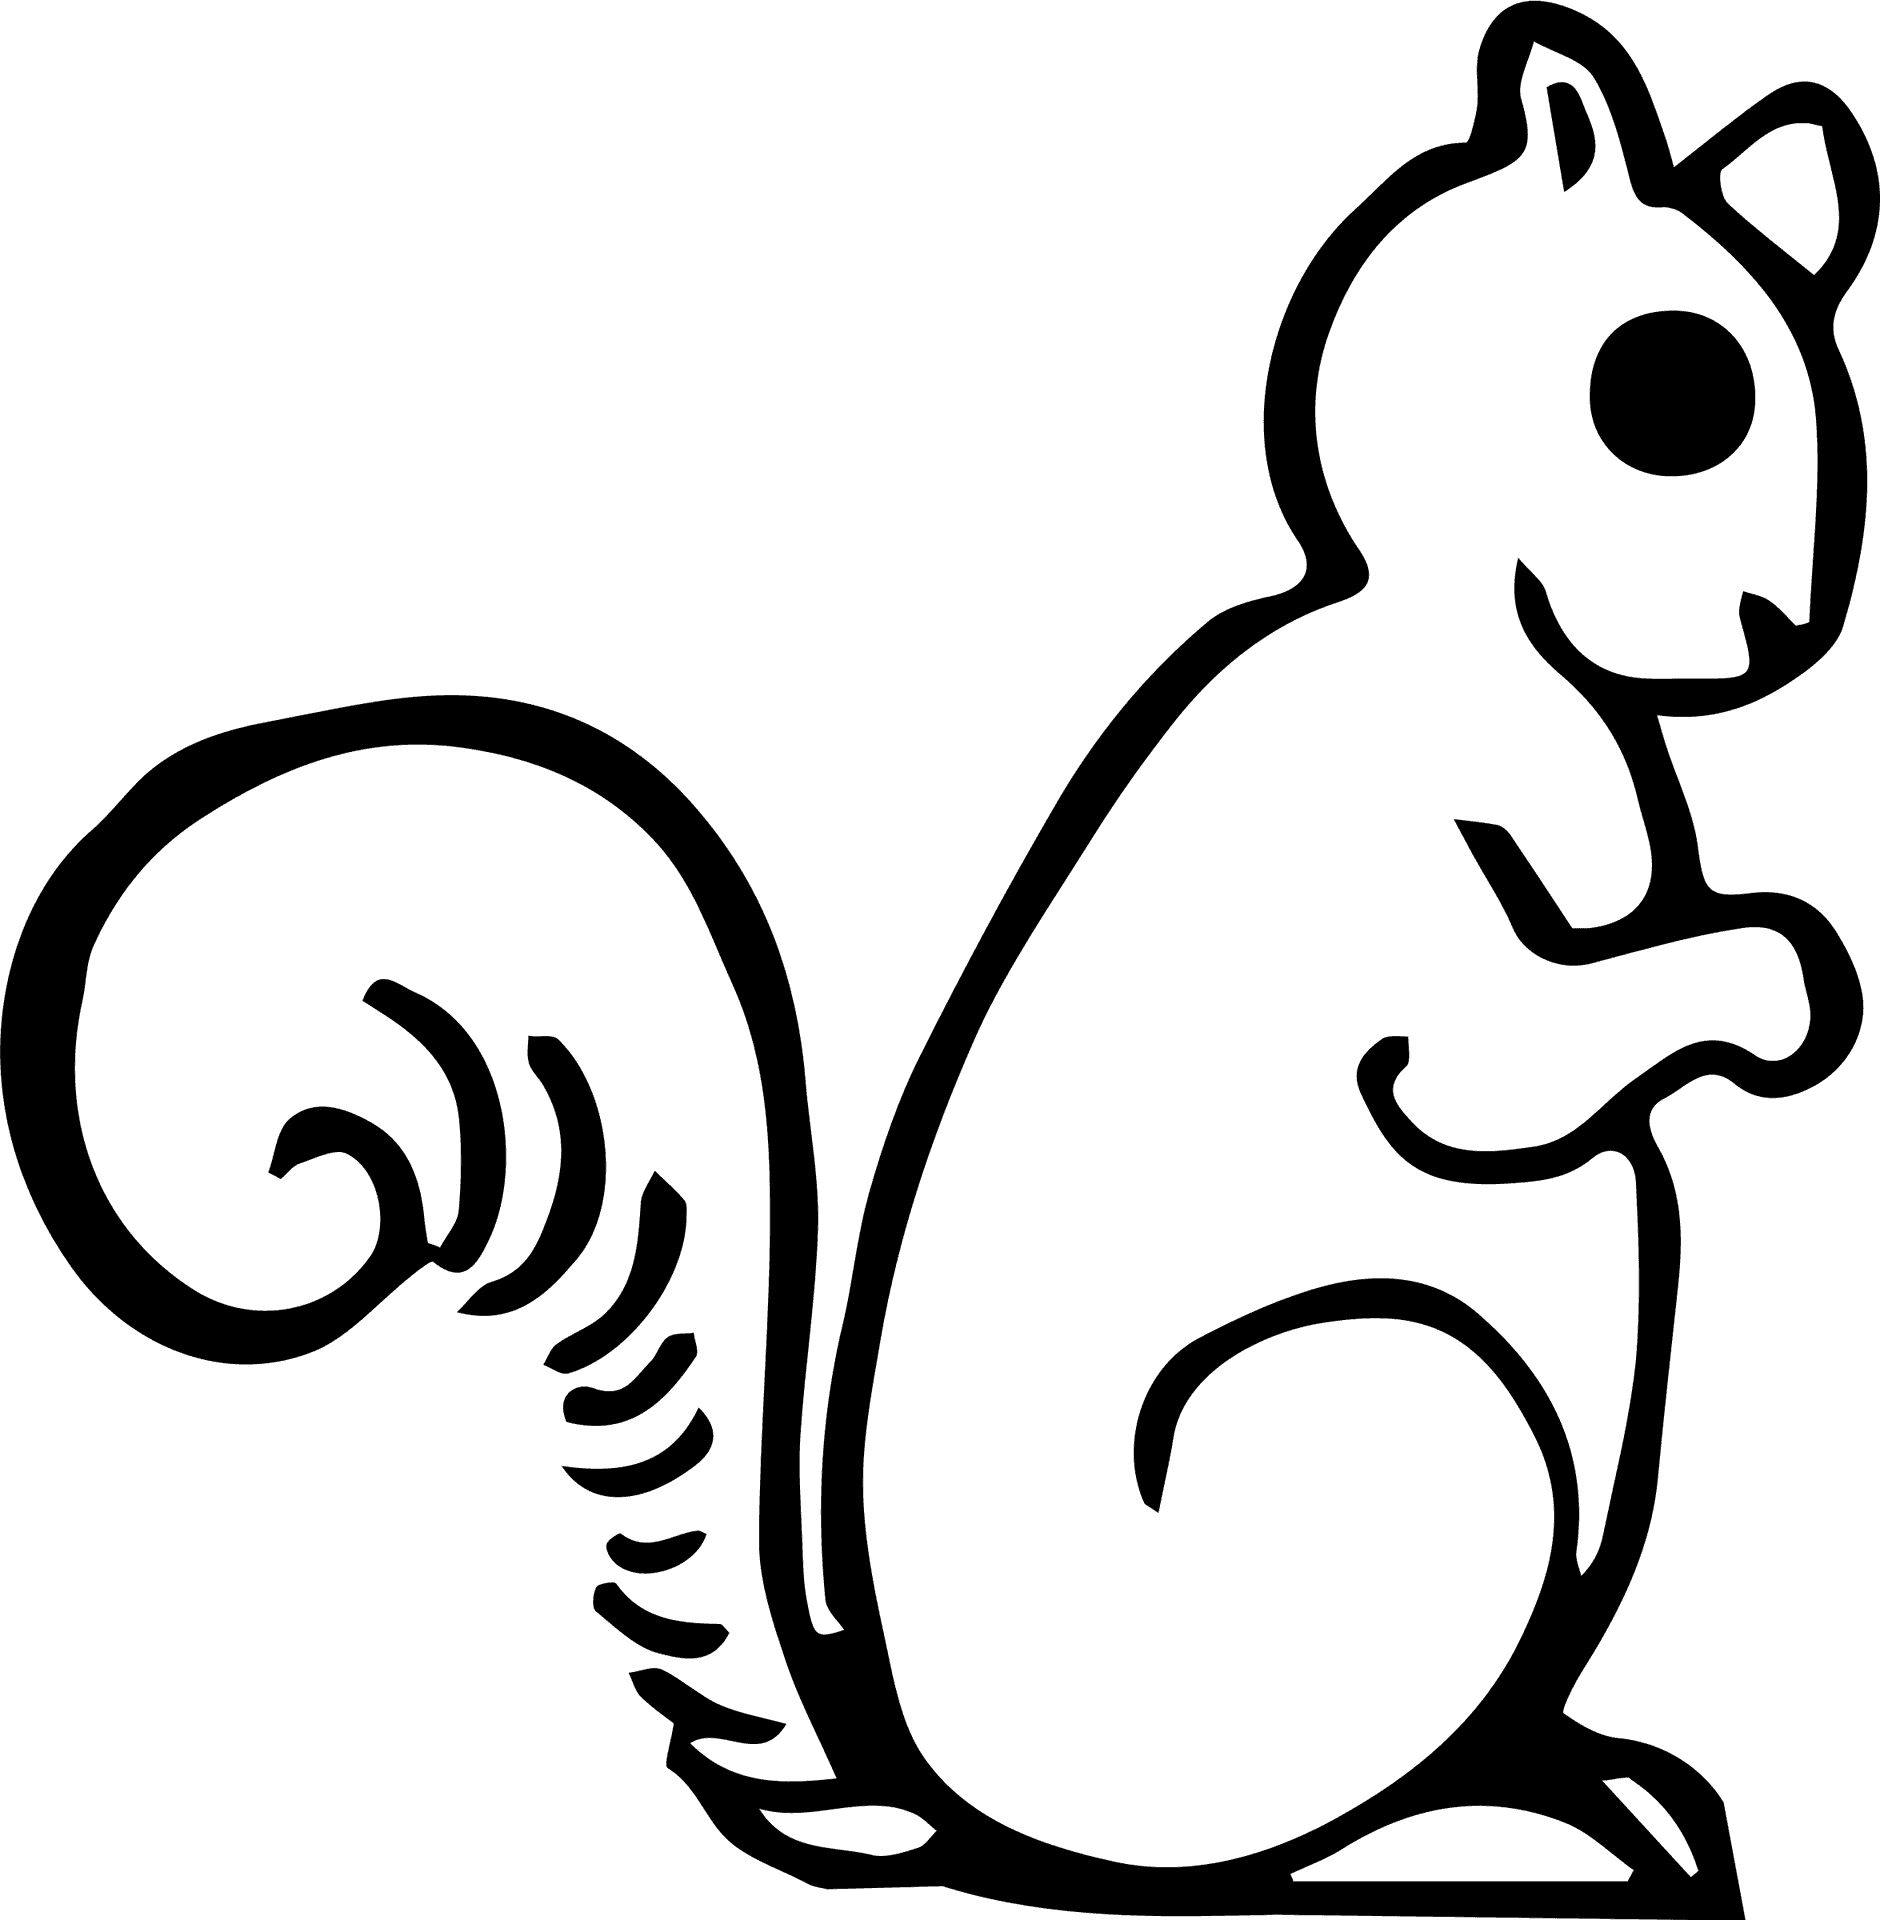 Simplified Squirrel Silhouette PNG